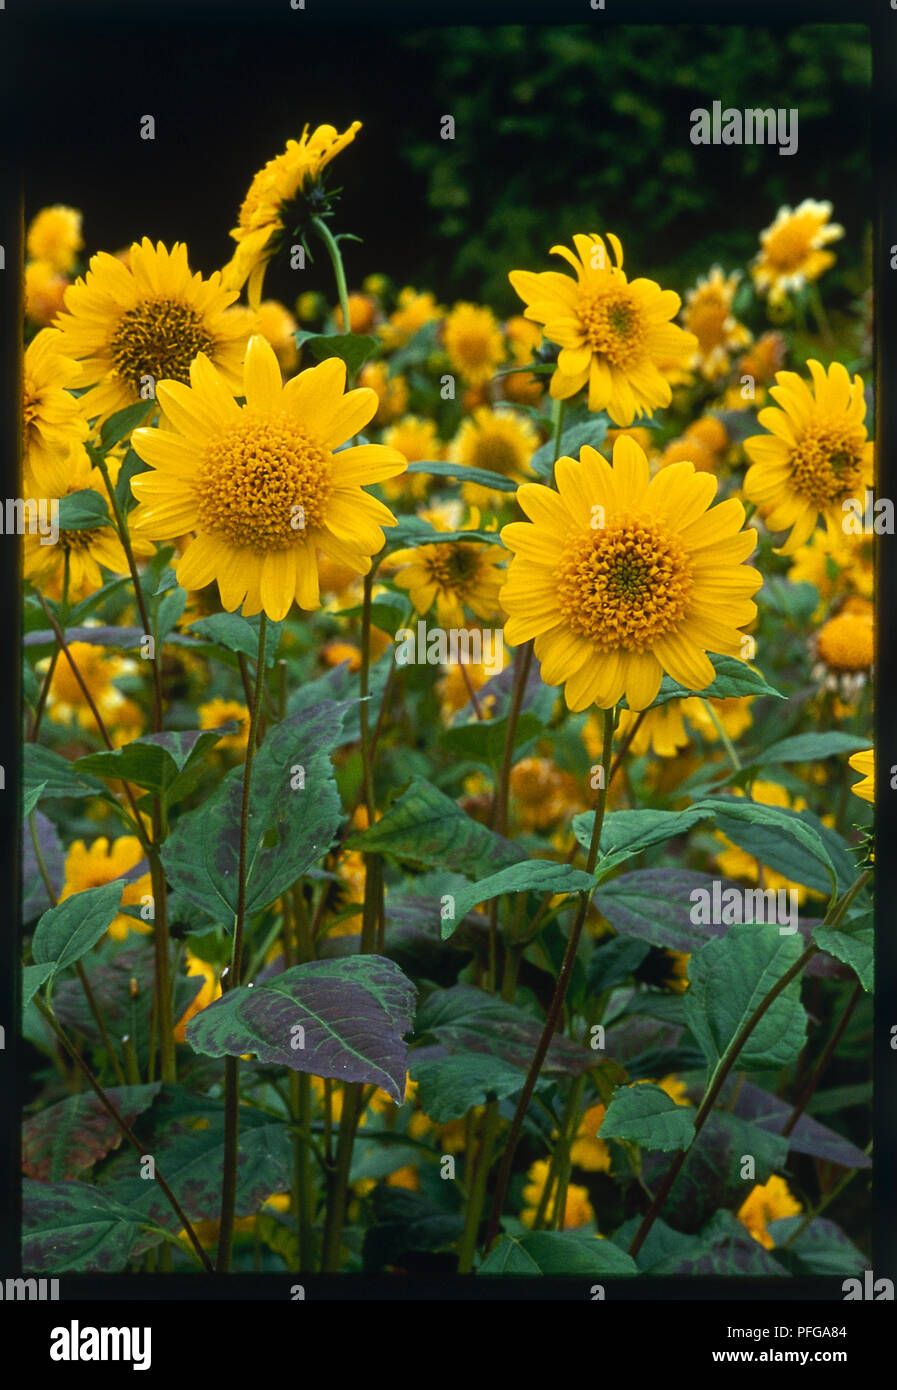 Sunflower, large semi-double, daisy-like bright yellow flowers with a yellow disc. Stock Photo